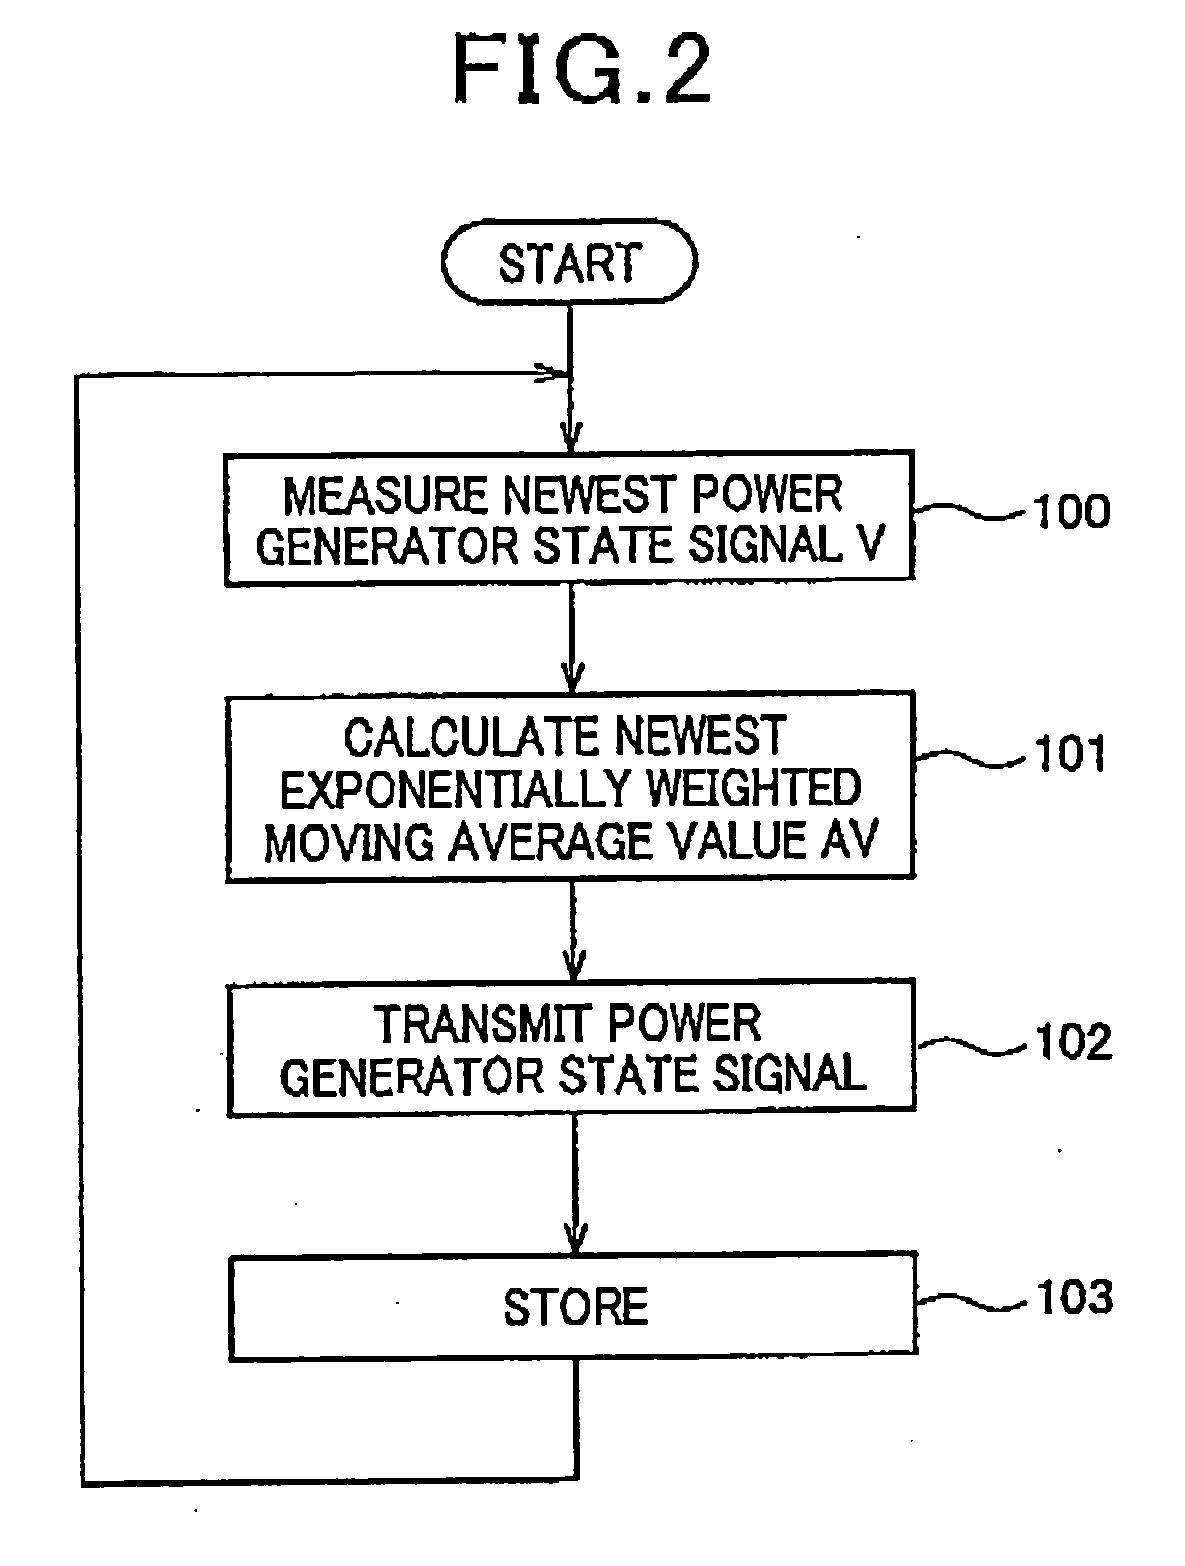 Voltage controller for vehicle using averaged status signal